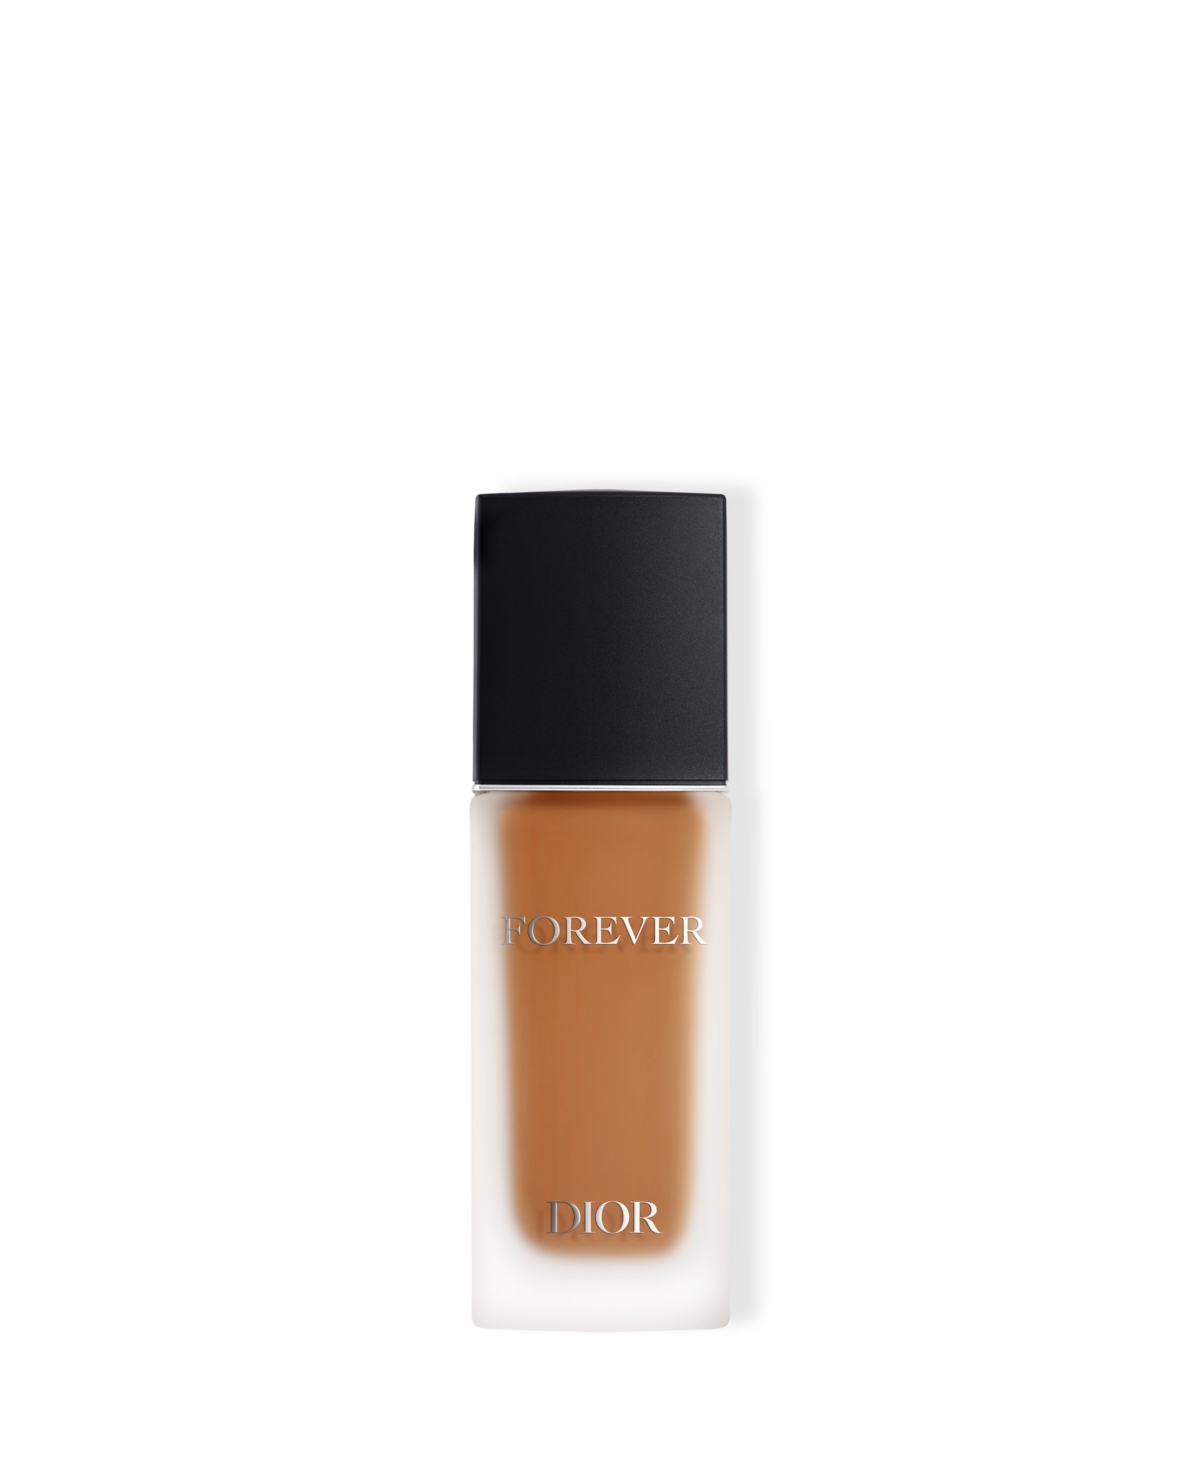 Dior Forever Matte Skincare Foundation Spf 15 In Neutral (medium To Deep Skin With Neutra